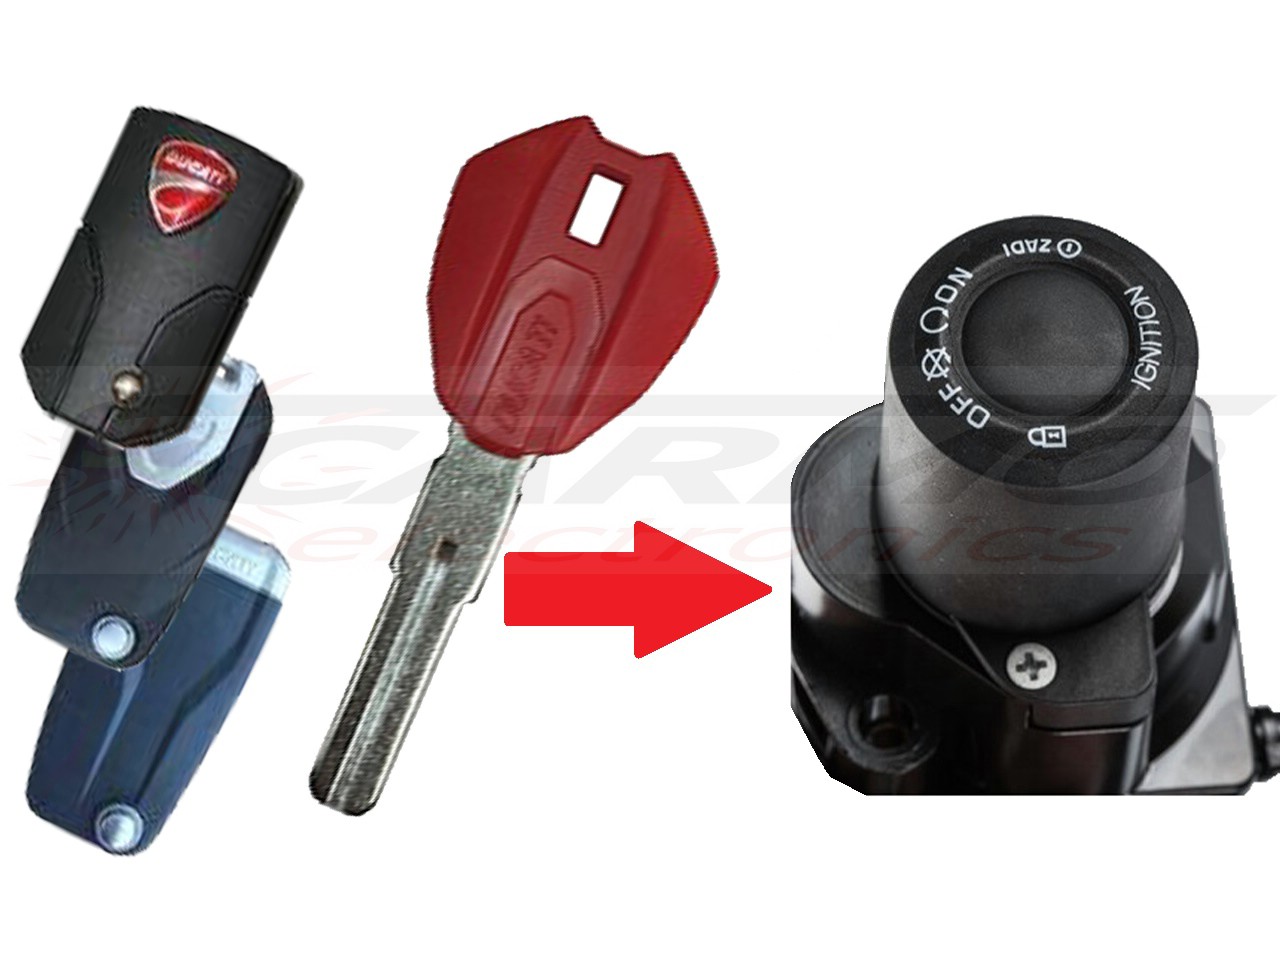 Ducati Multistrada Diavel keyless hands free system lost key FOBs chip programming - Click Image to Close